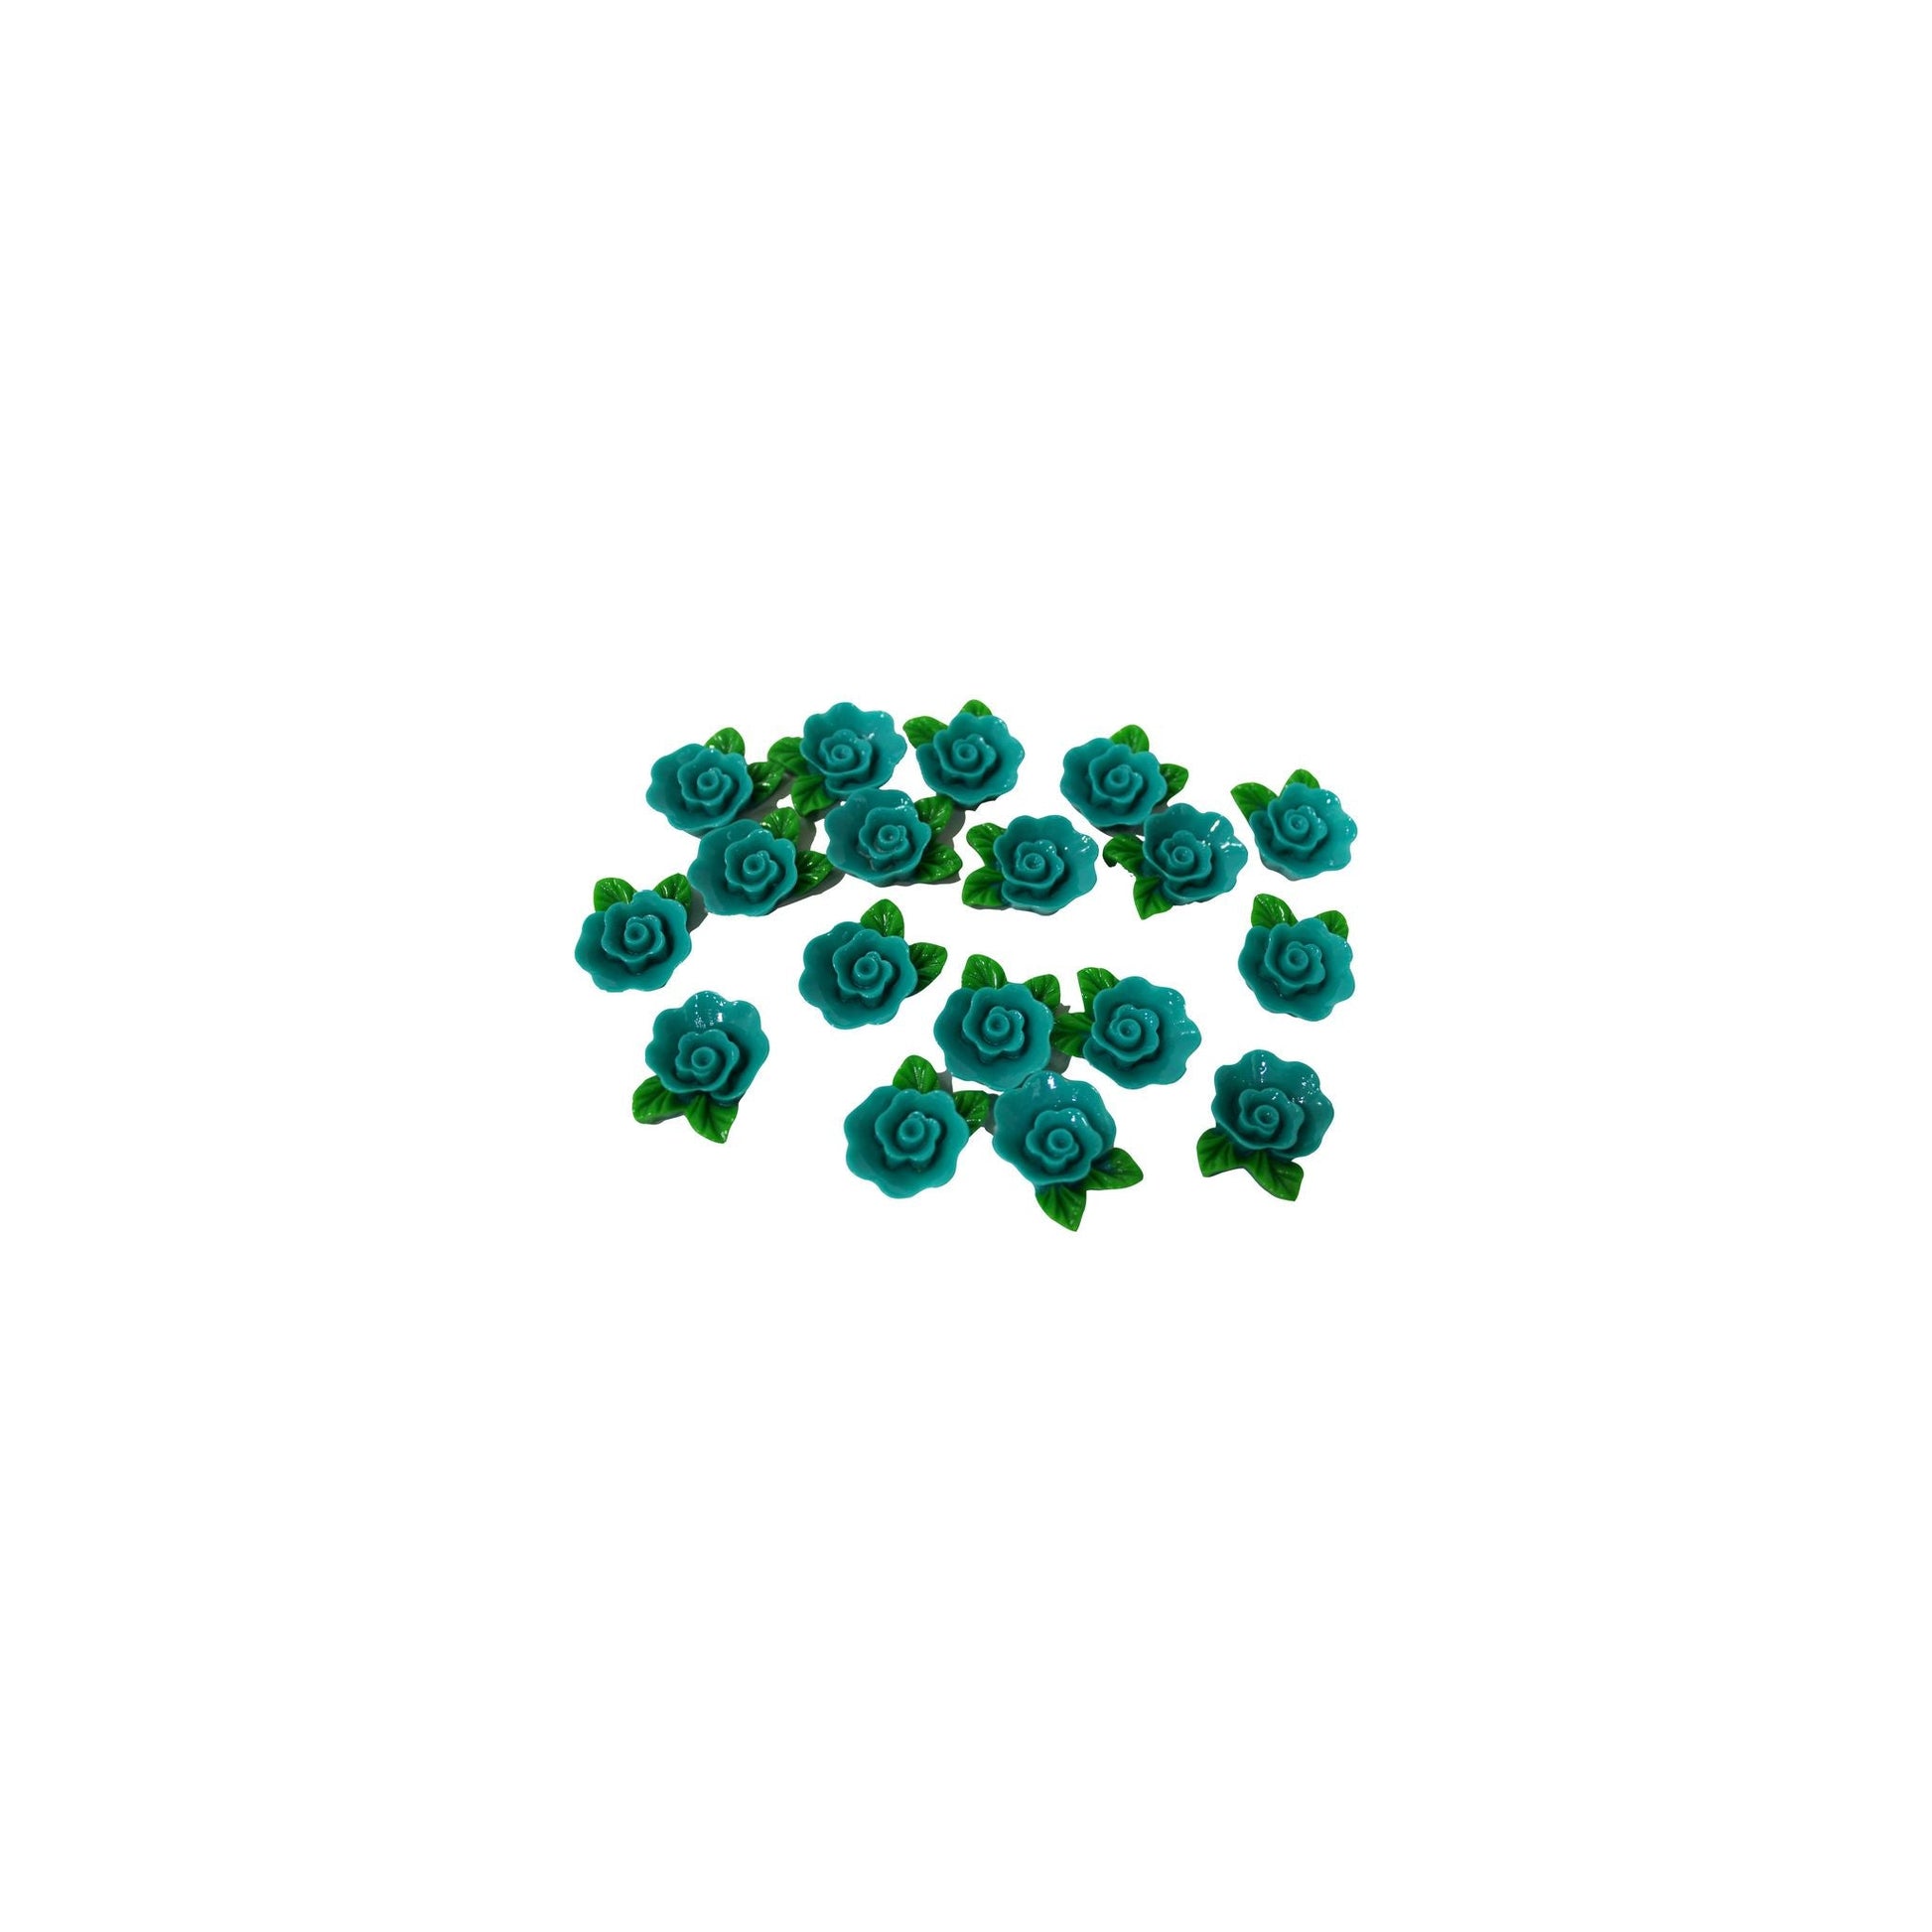 Indian Petals Acrylic Floral 3D Beautiful Cabochons Motif for Craft or Decoration - 12439, Teal